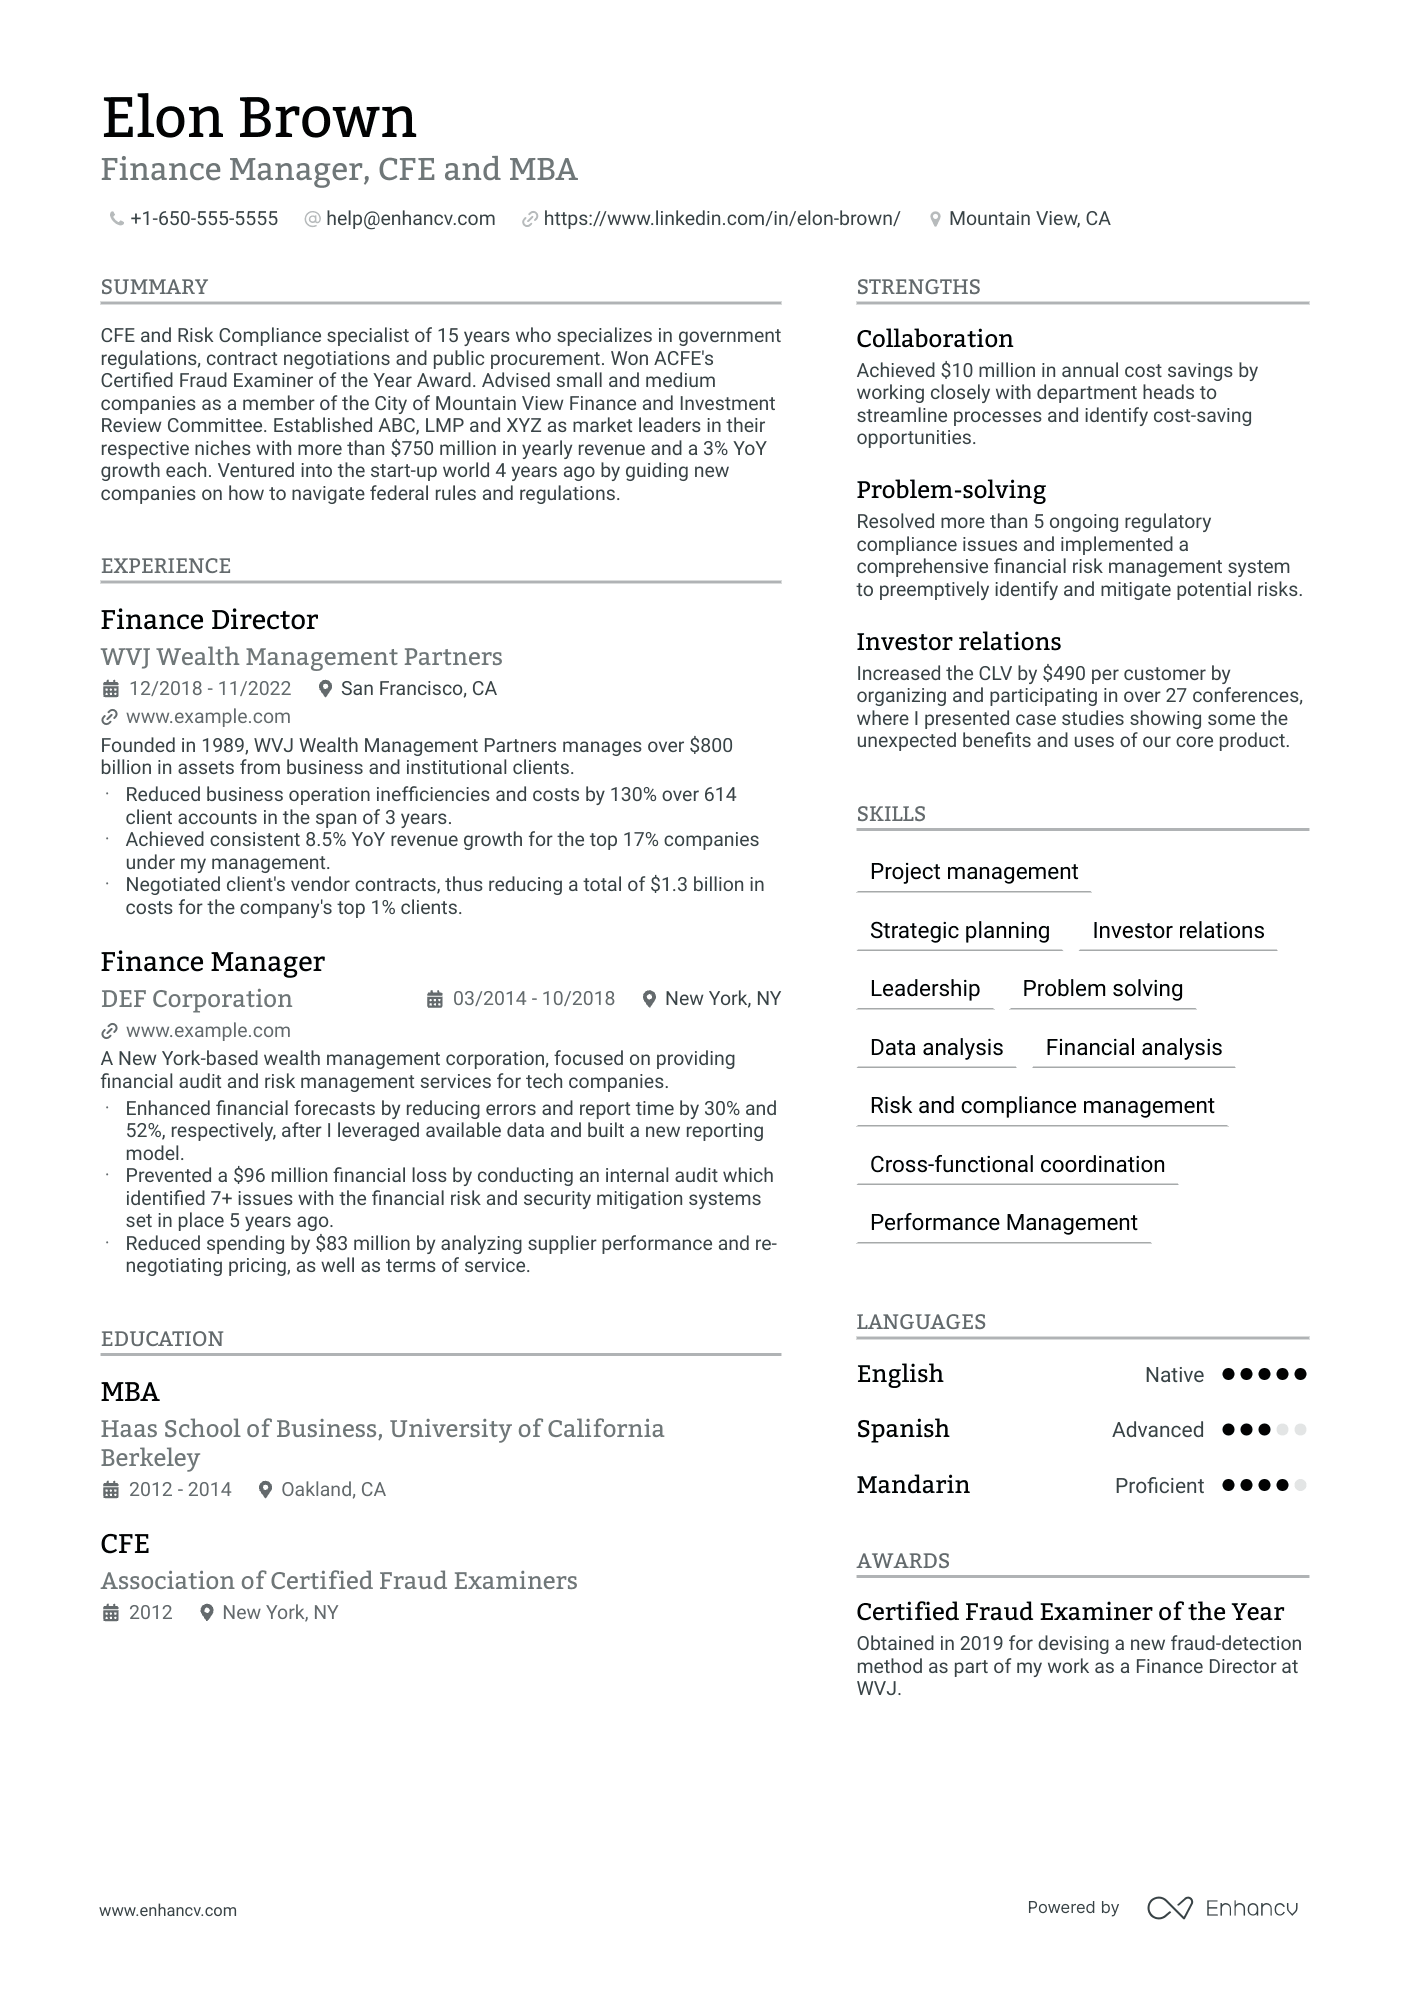 Finance Manager, CFE and MBA resume example